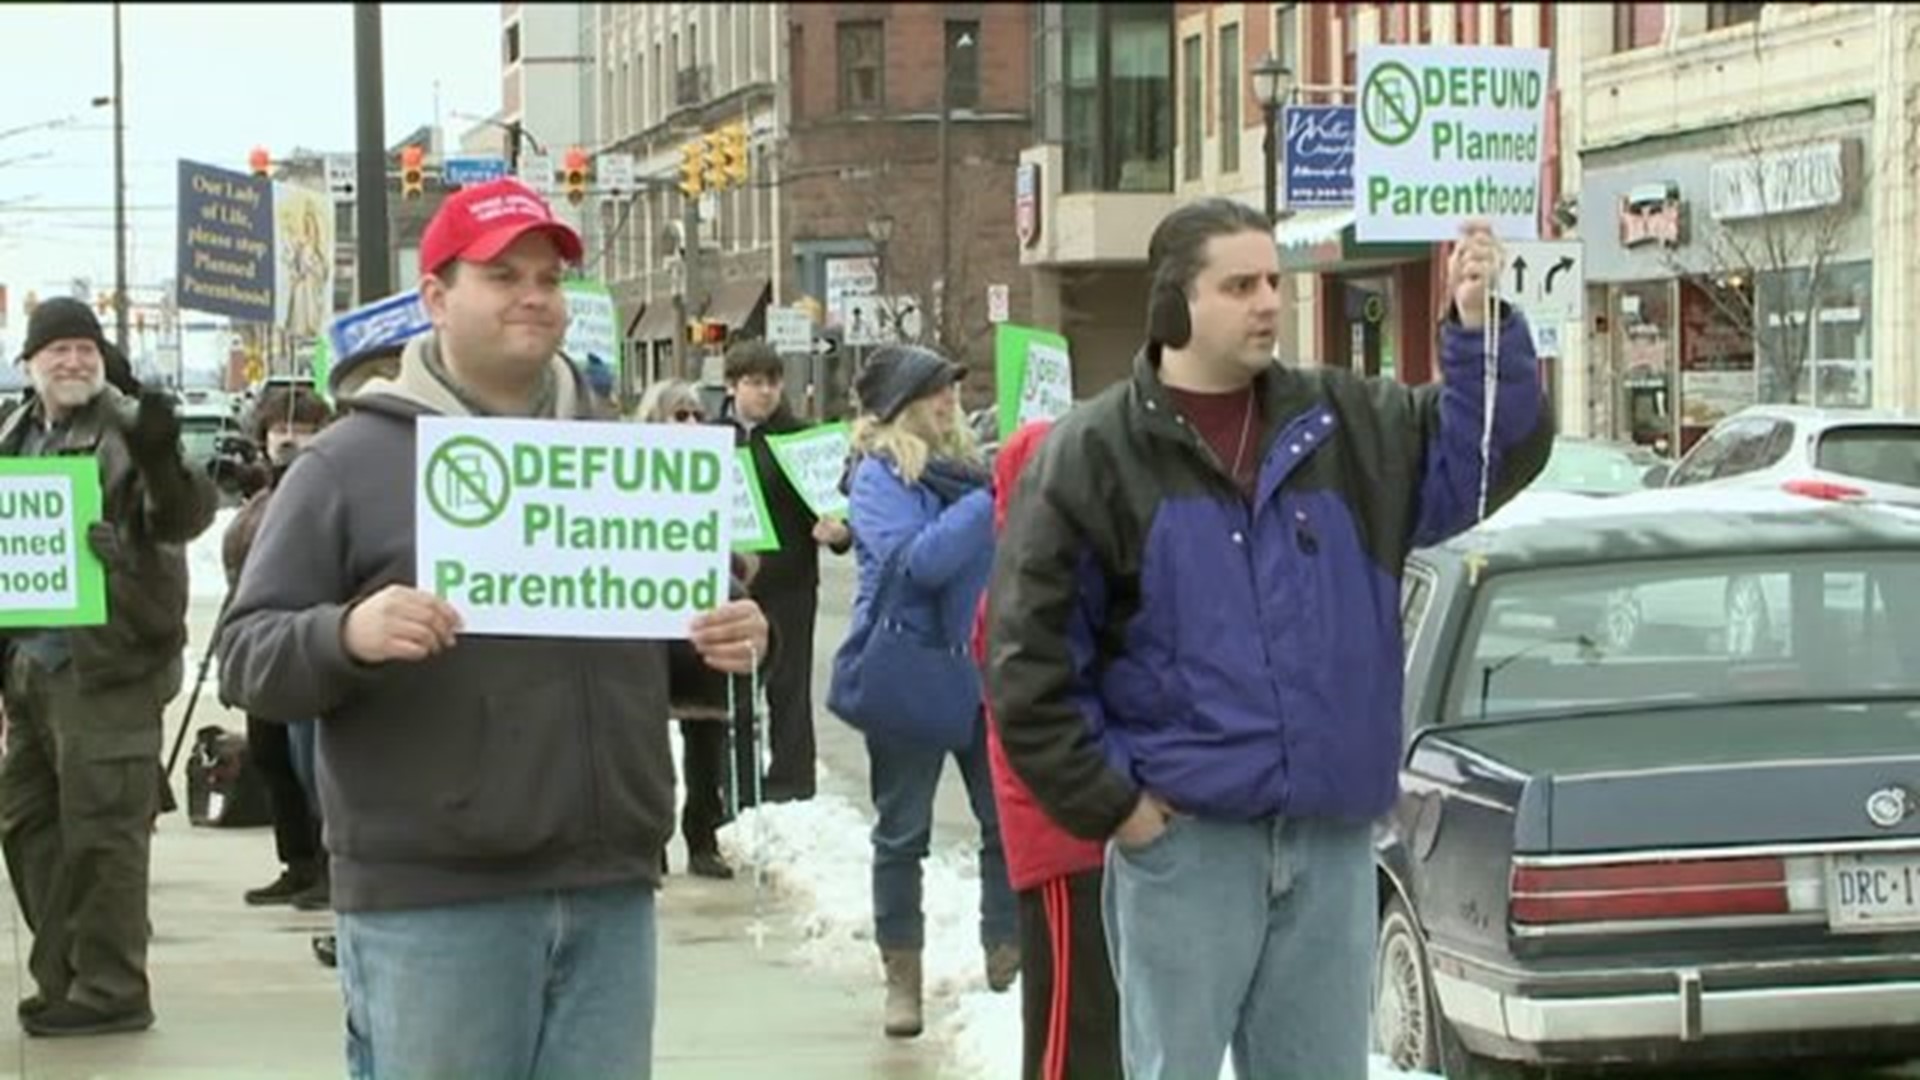 Rally to Defund Planned Parenthood